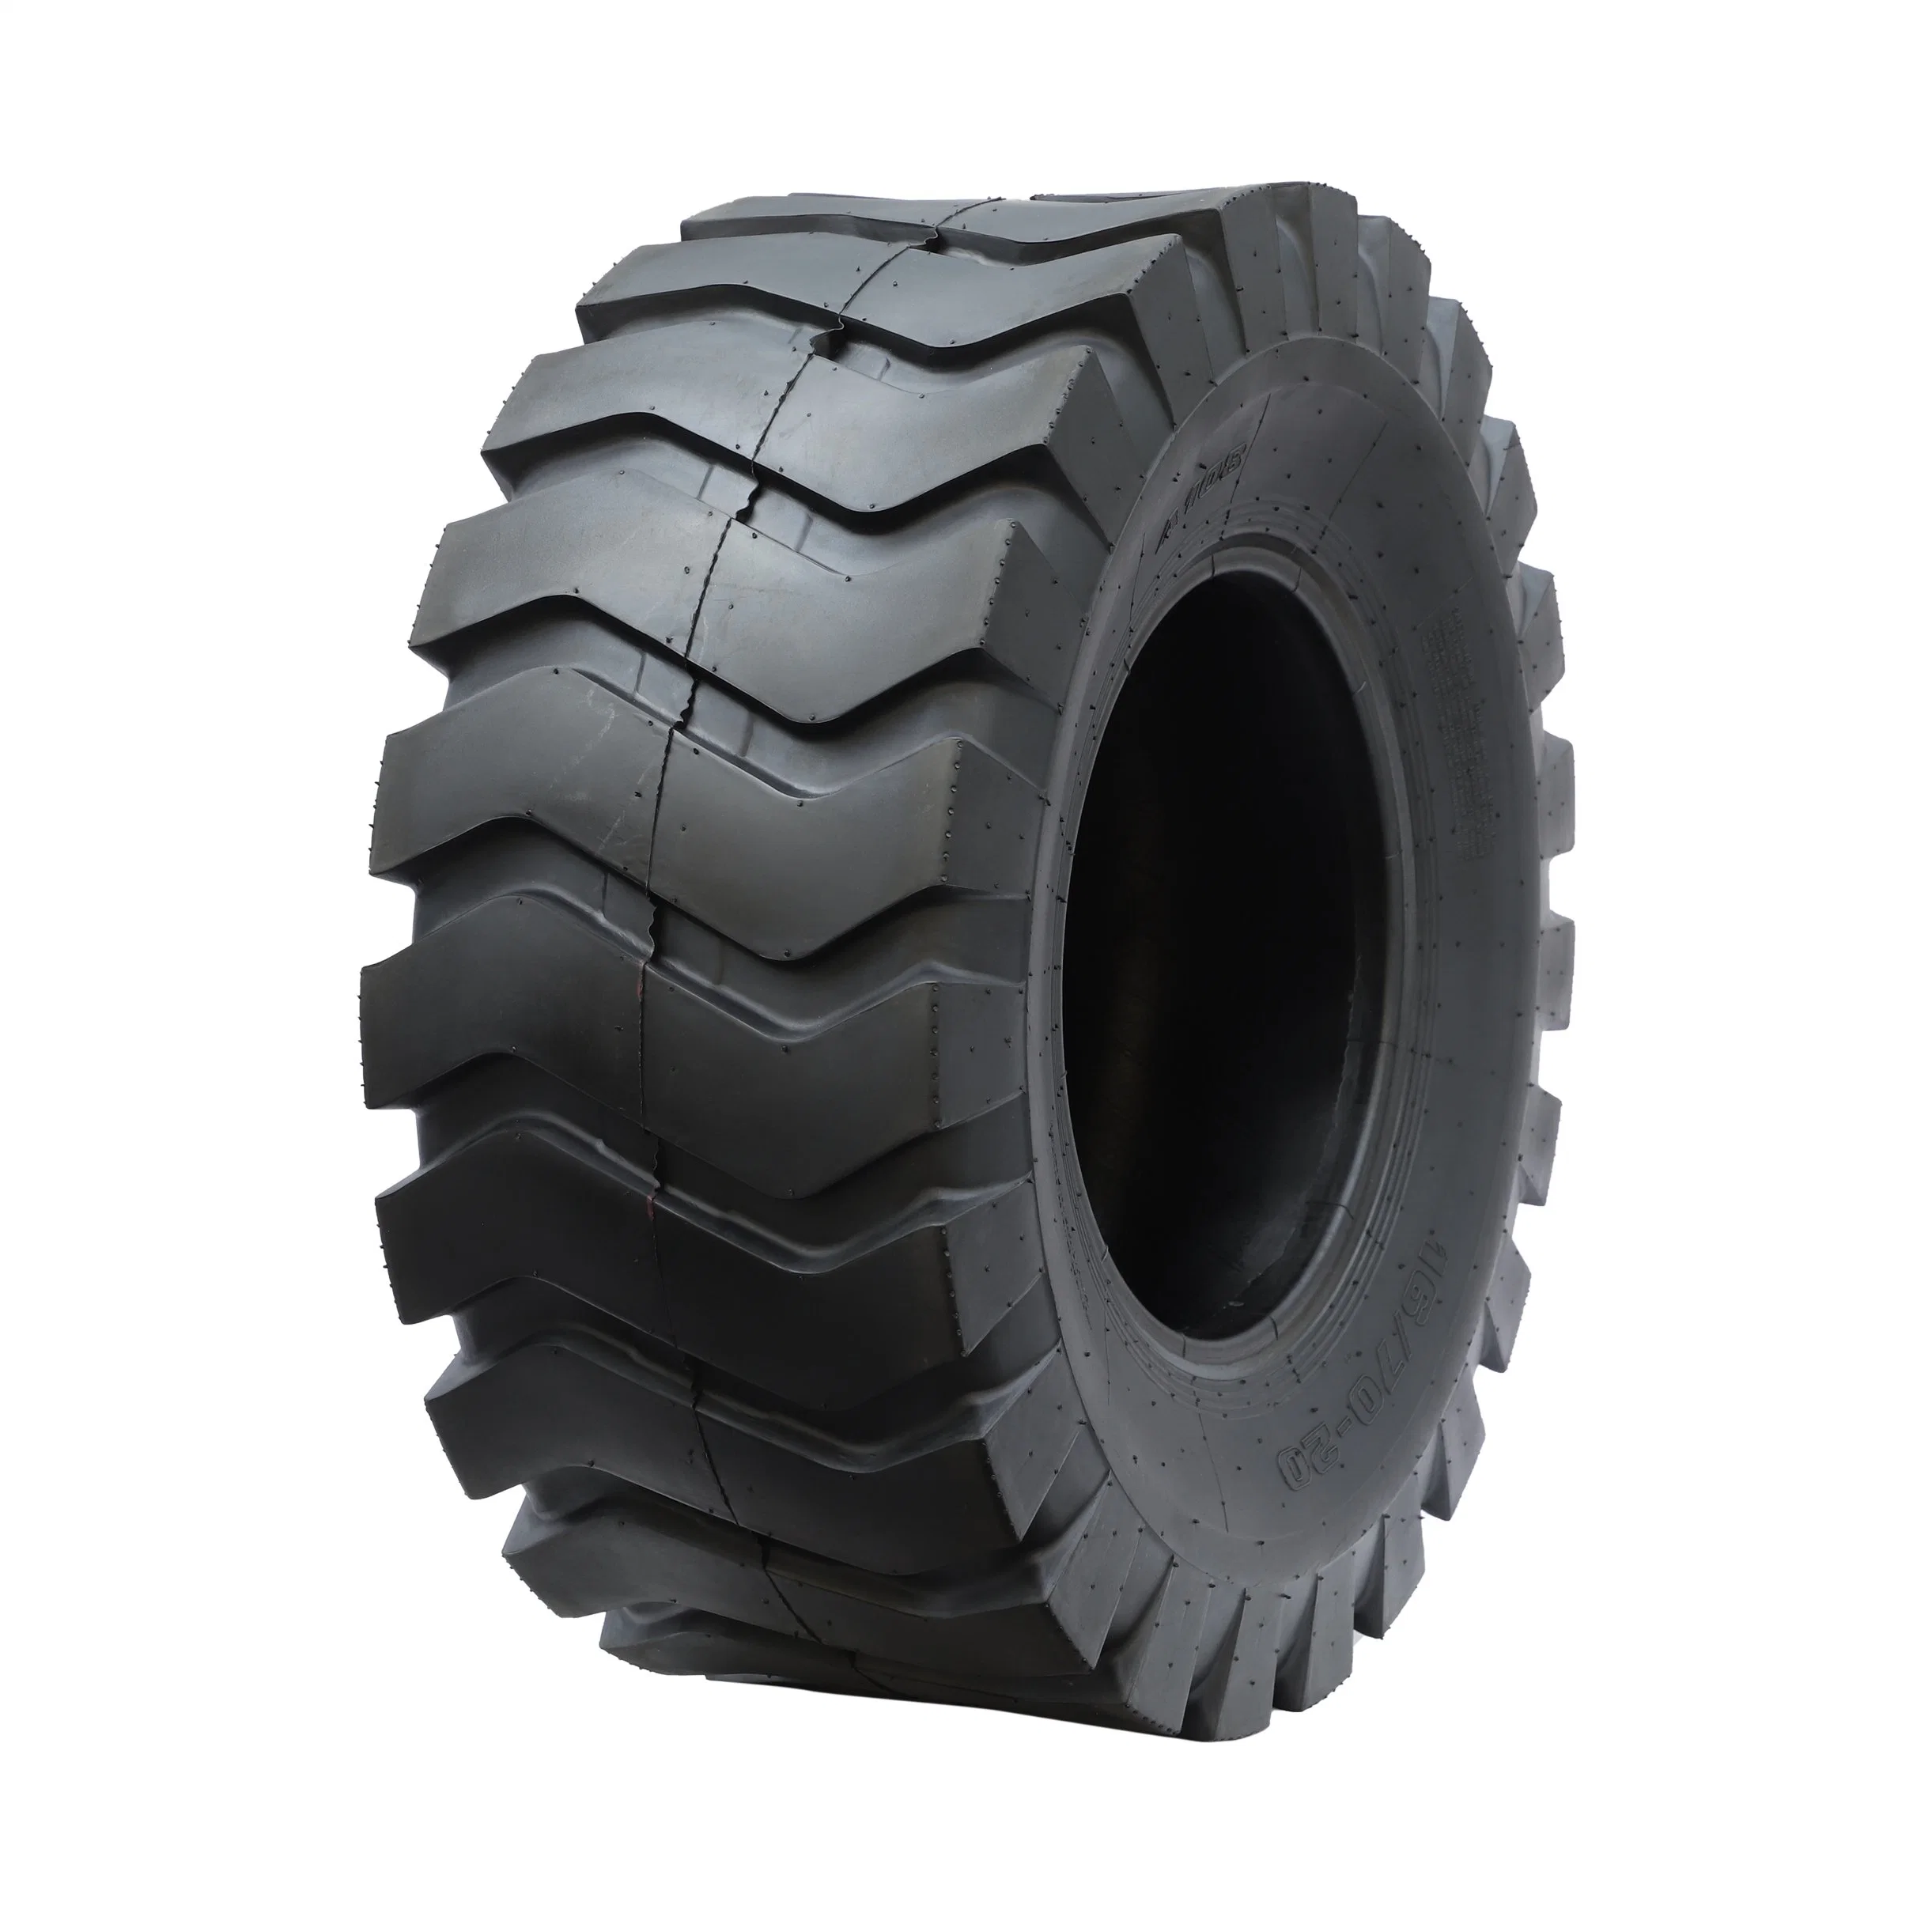 Double Horse Rock King A108 12.00-16 off The Road Tyre OTR Tyre Construction Tyre Engieering Tire Bias Tires Ort Rubber Tyre Factory